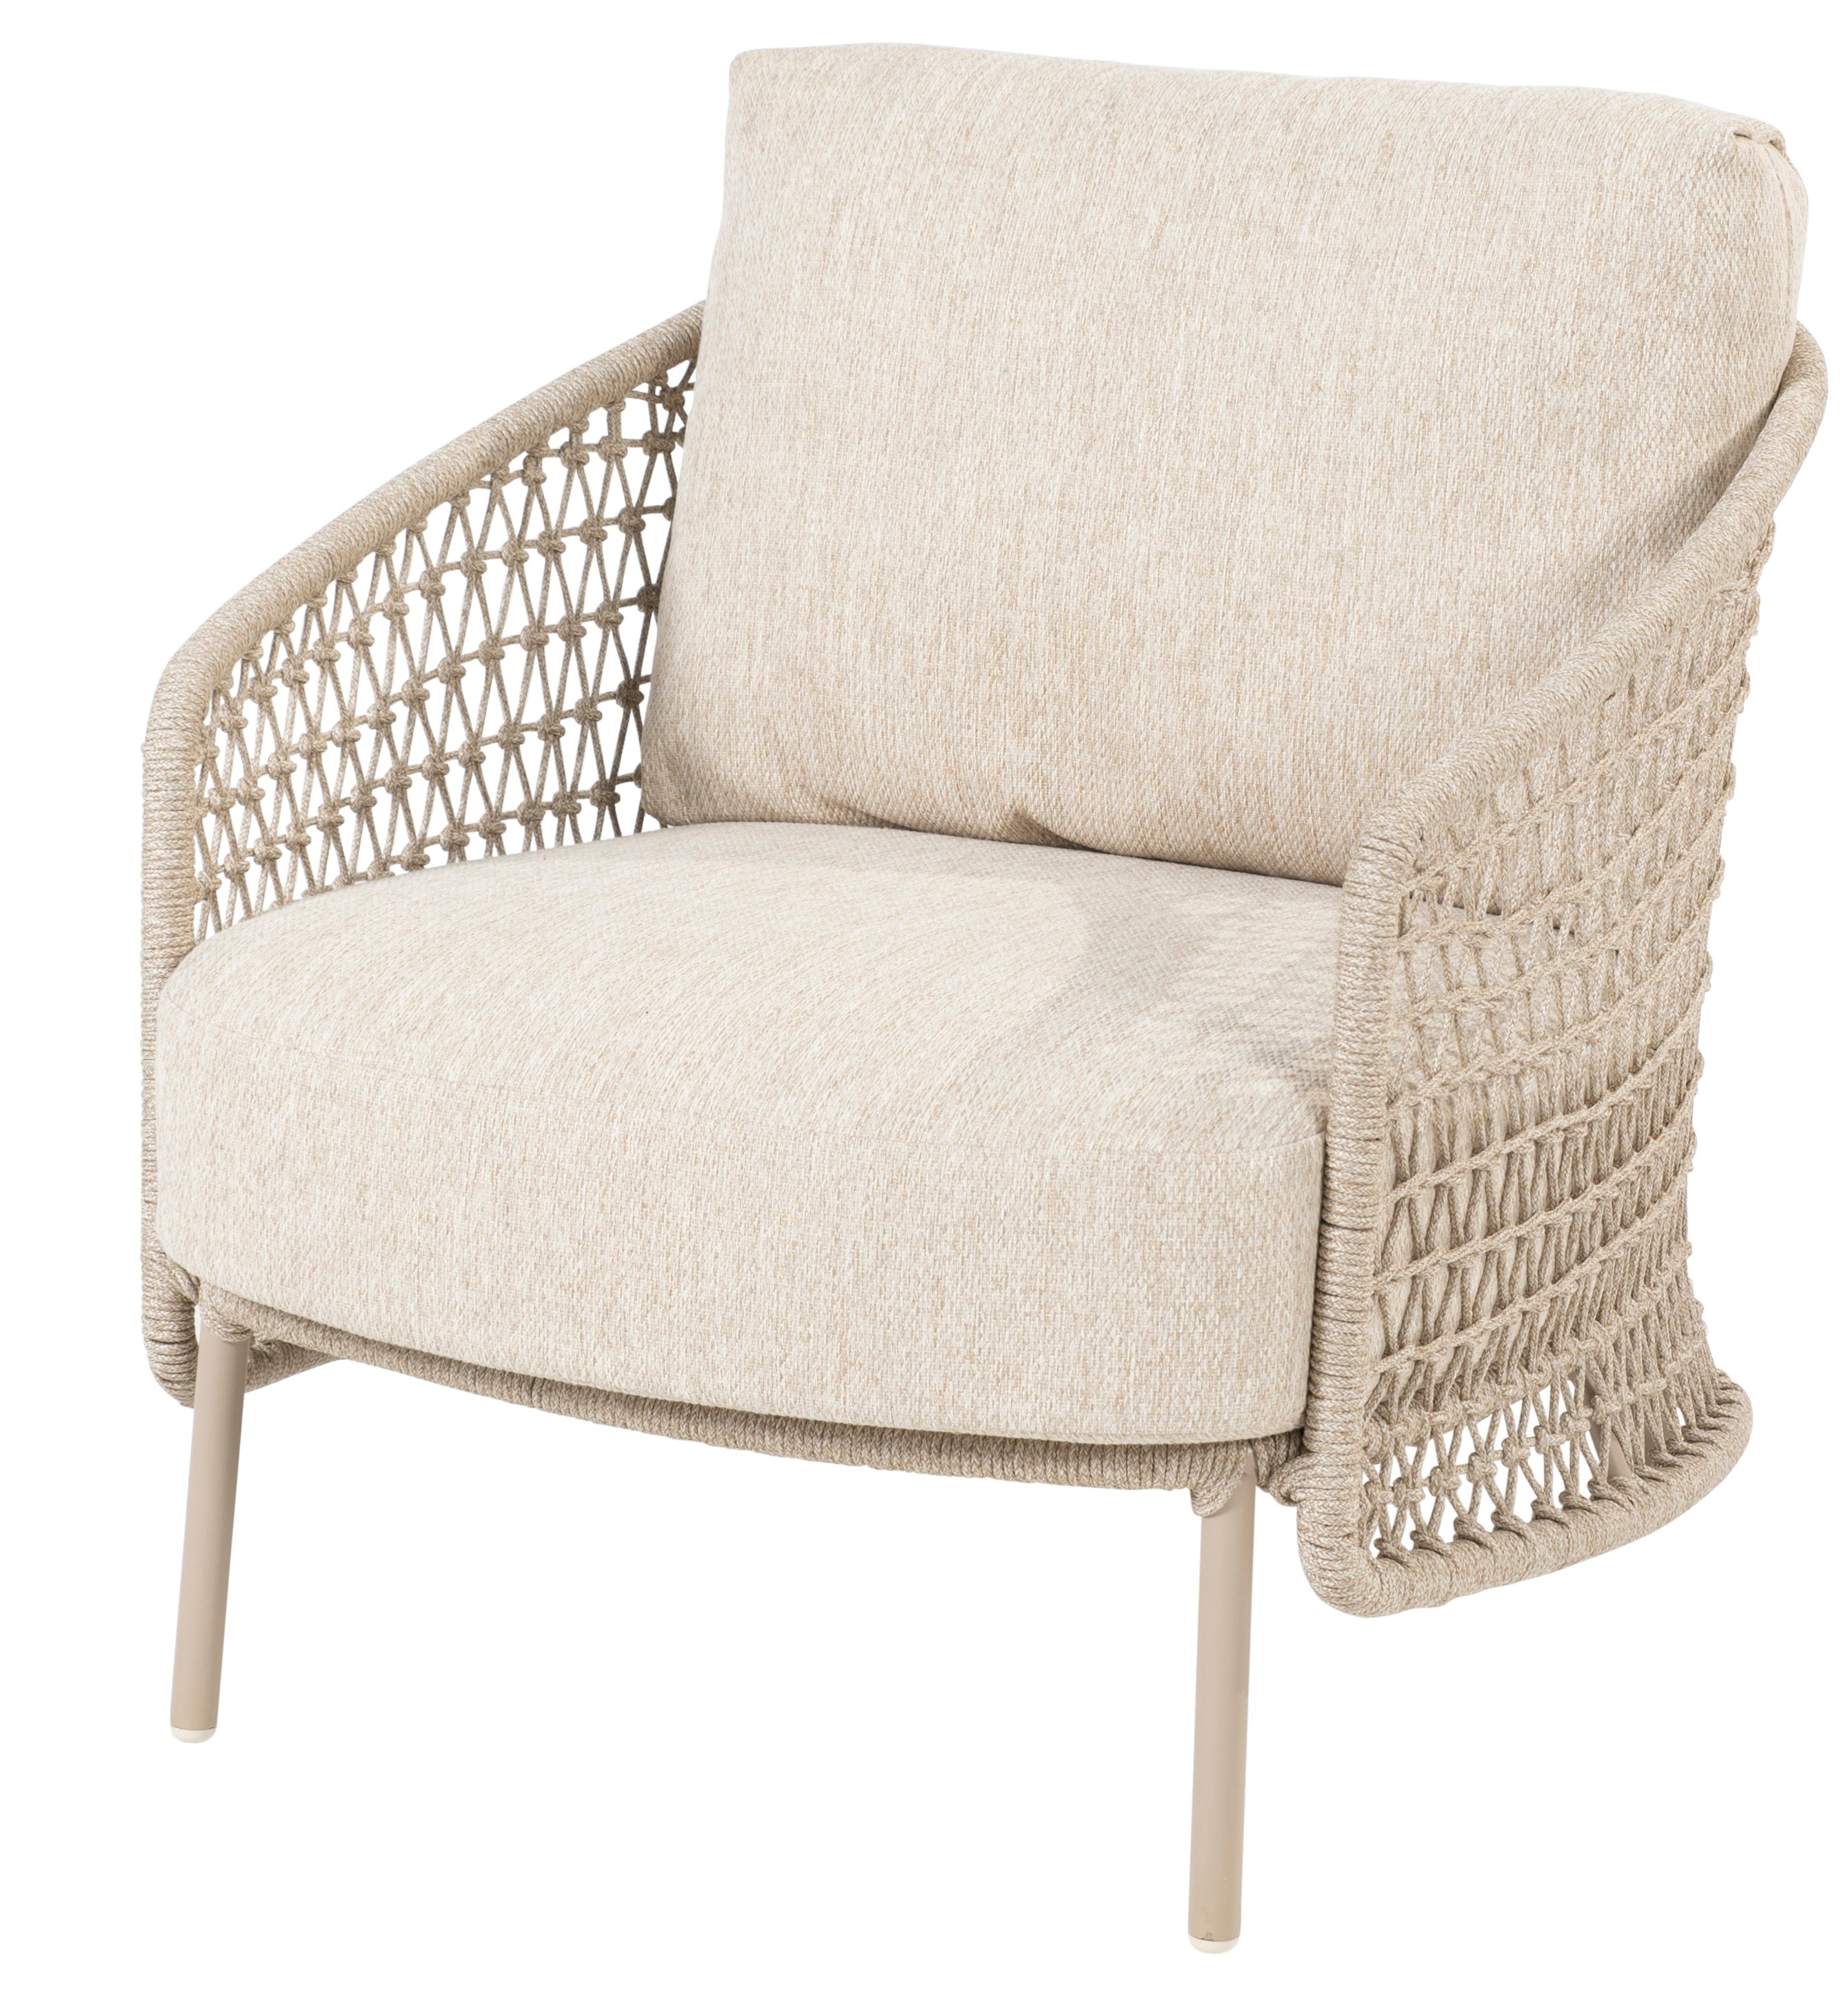 4 Seasons Outdoor Puccini Living Chair Latte With 2 Cushions